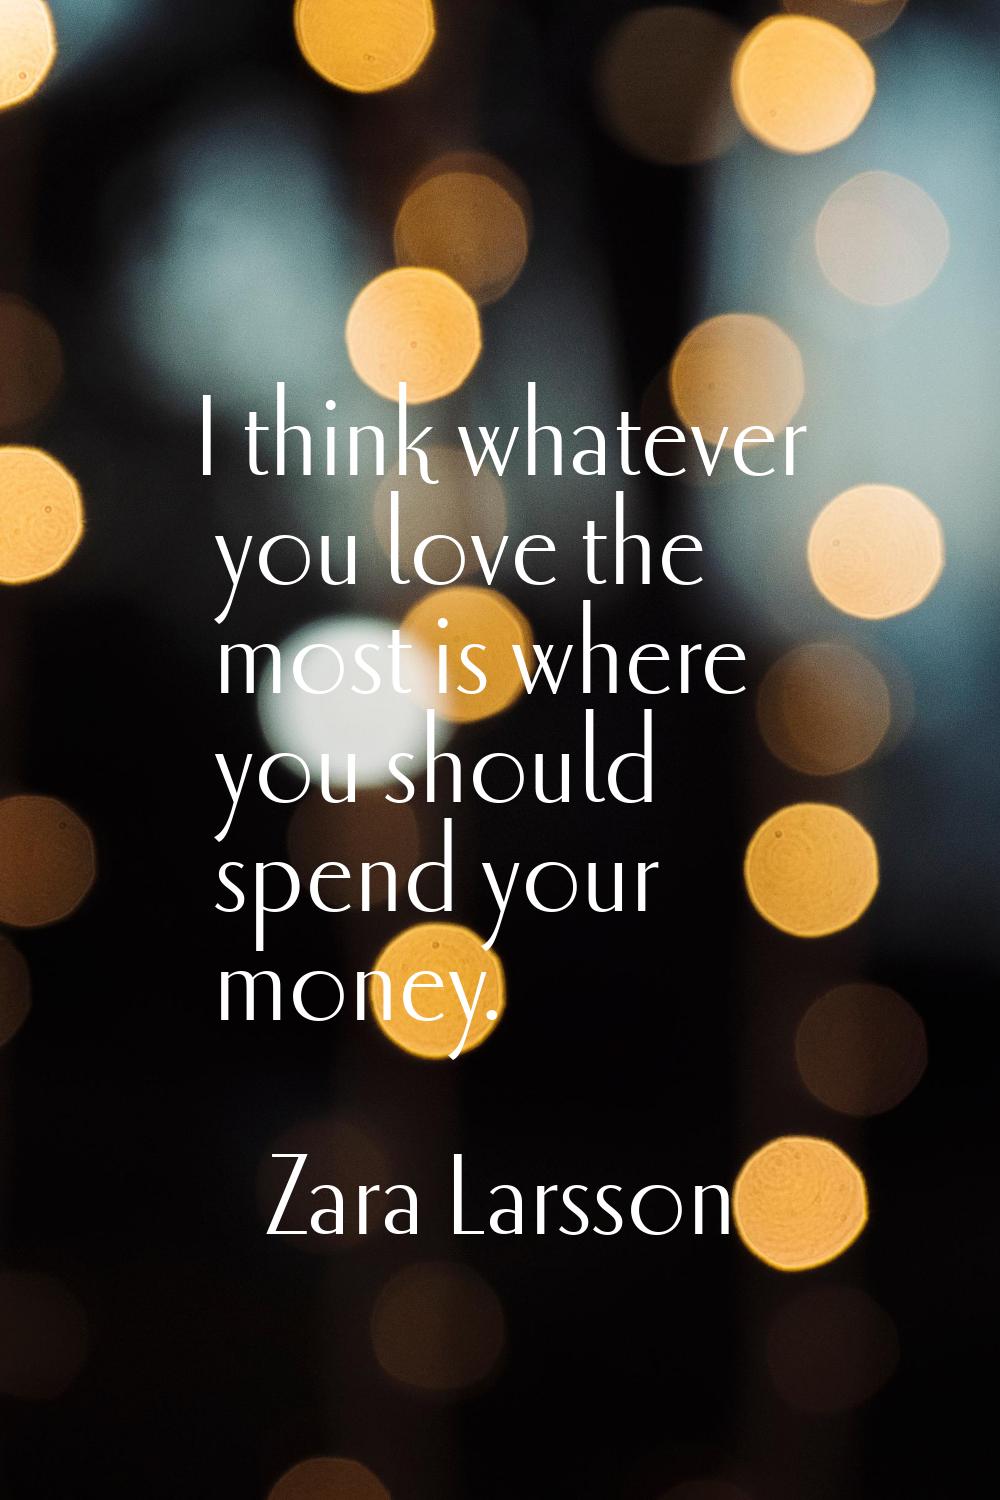 I think whatever you love the most is where you should spend your money.